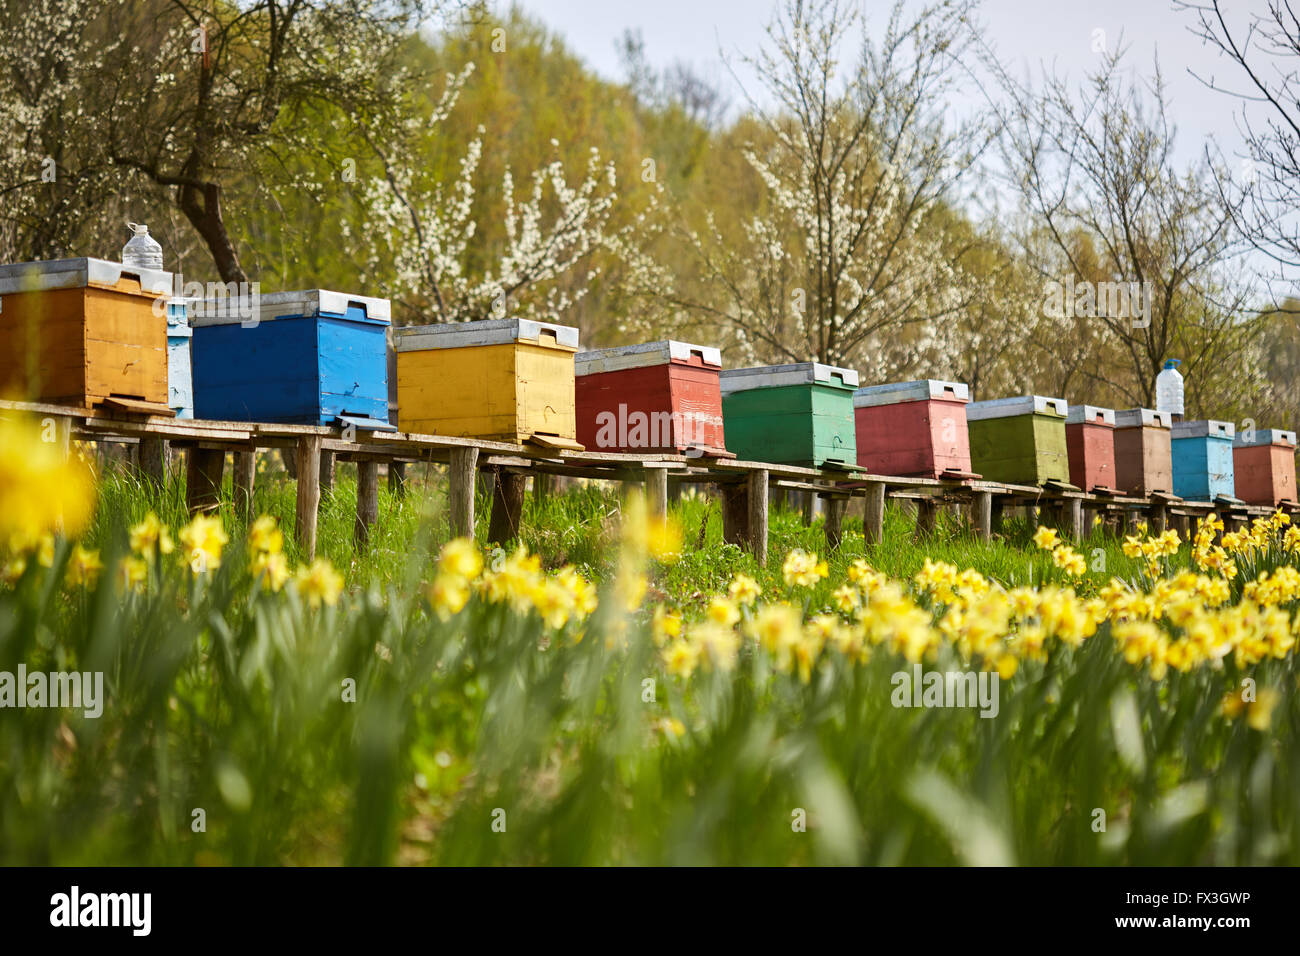 A row of bee hives in a field of flowers with an orchard behind Stock Photo